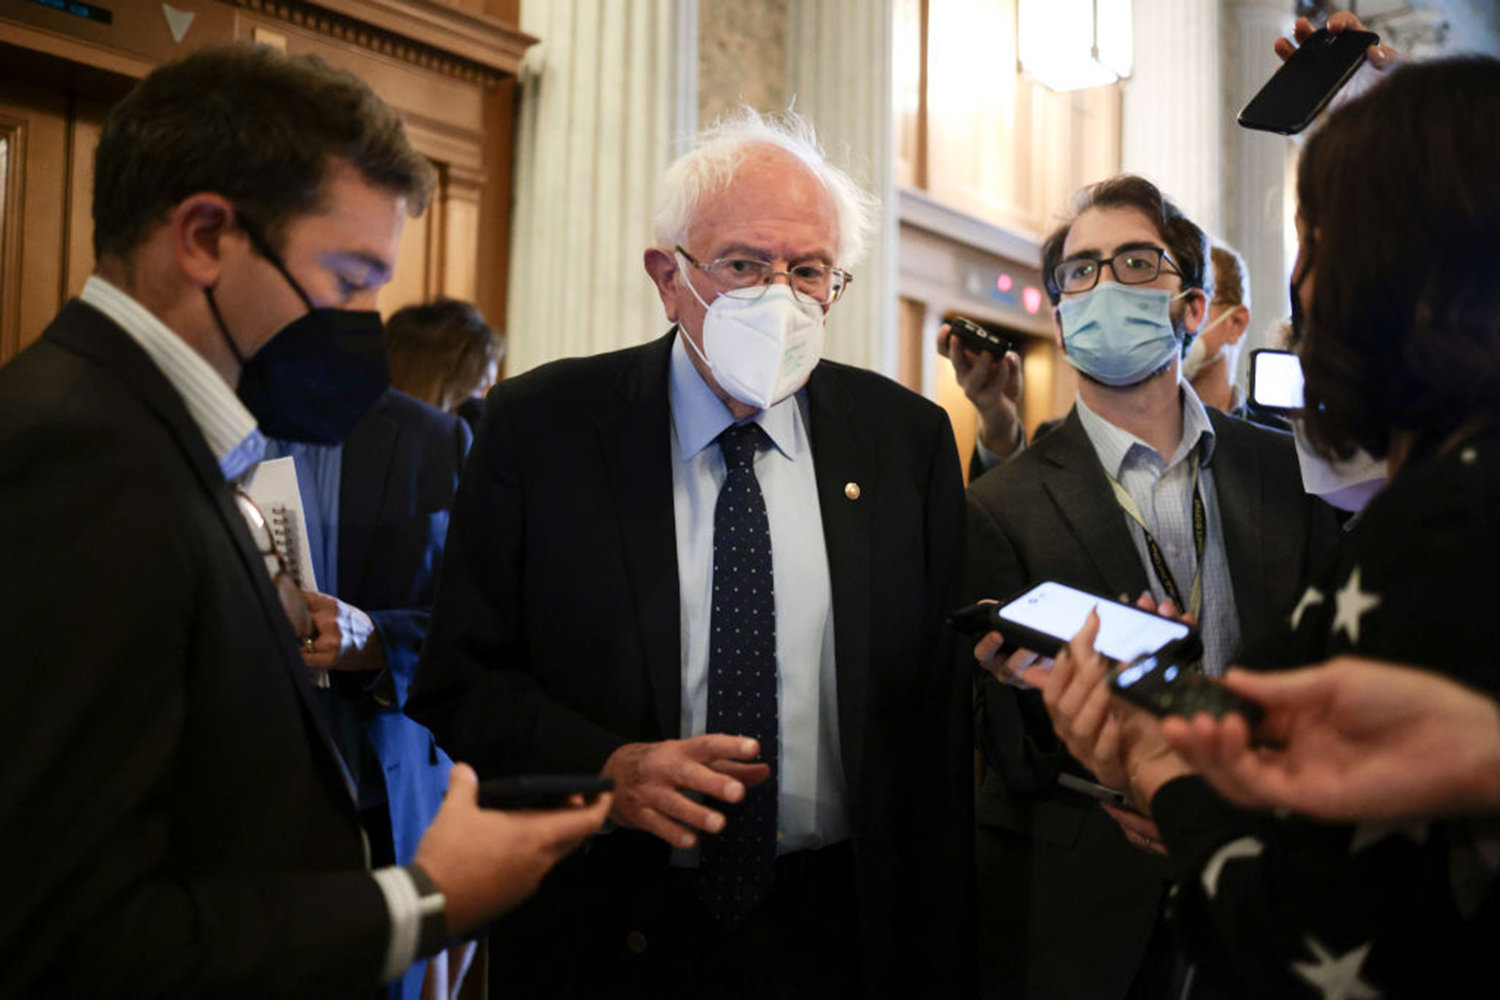 Sen. Bernie Sanders (I-VT) speaks to reporters as he arrives to the Senate Chambers during a series of votes in the U.S. Capitol Building on Oct. 6, 2021 in Washington, DC. (Anna Moneymaker/Getty Images/TNS)